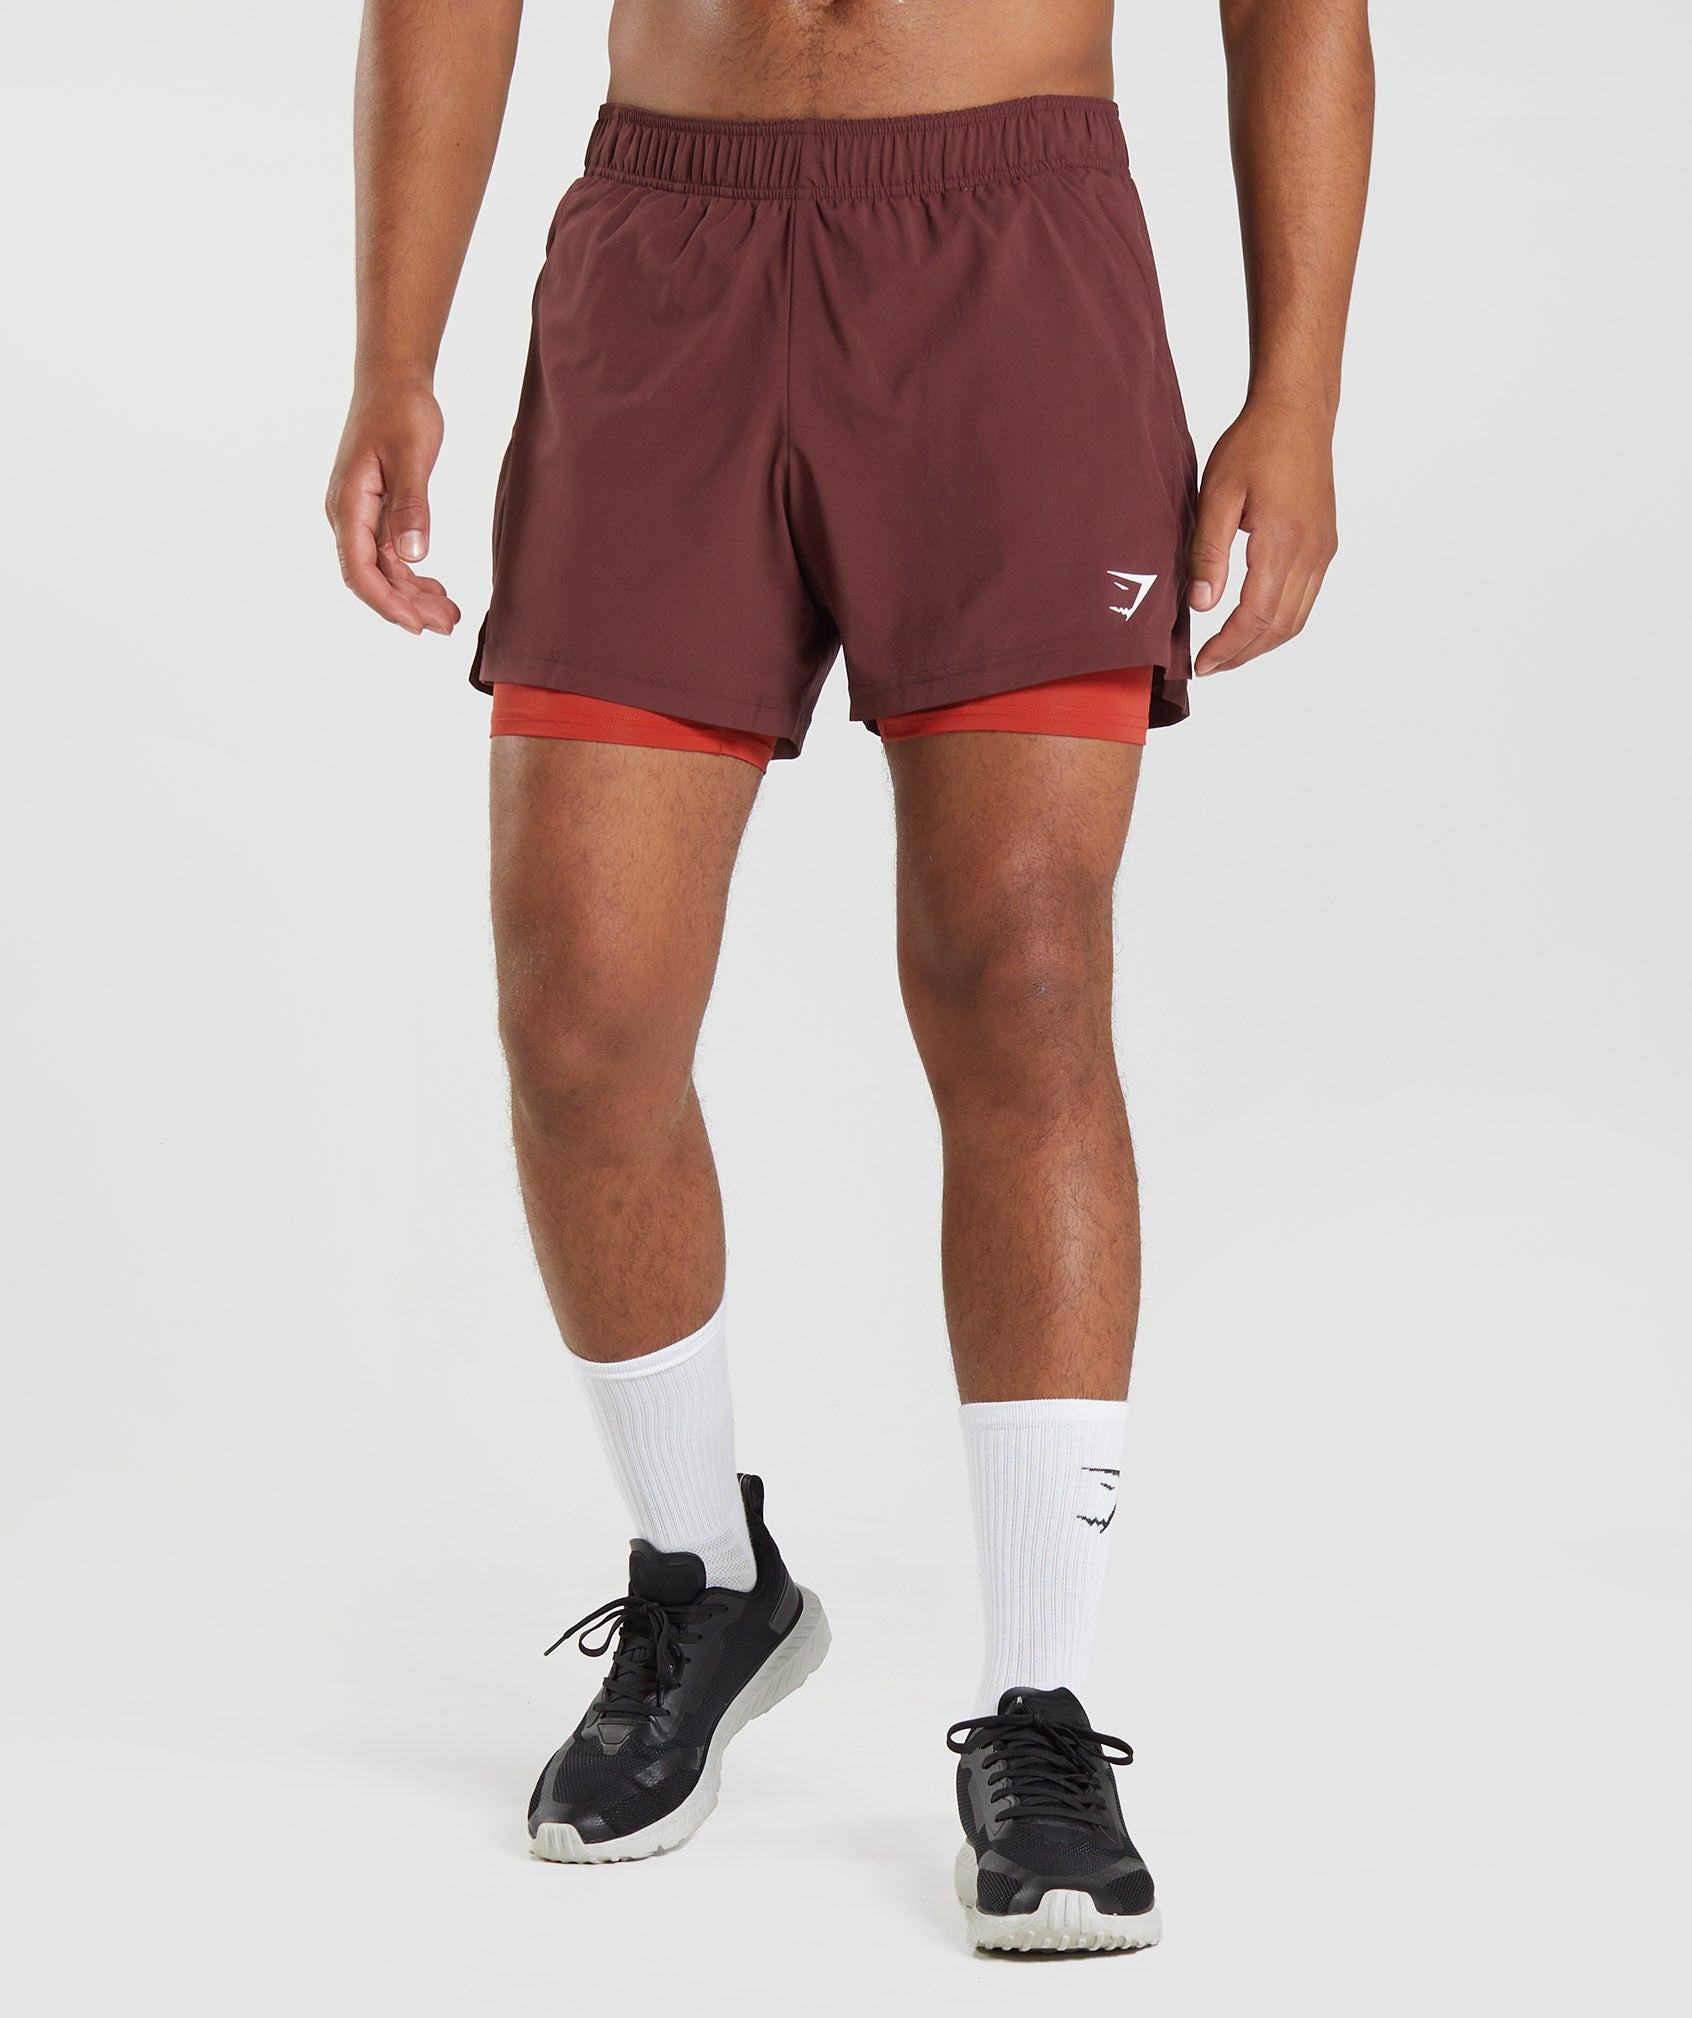 Sport 5" 2 In 1 Shorts in {{variantColor} is out of stock